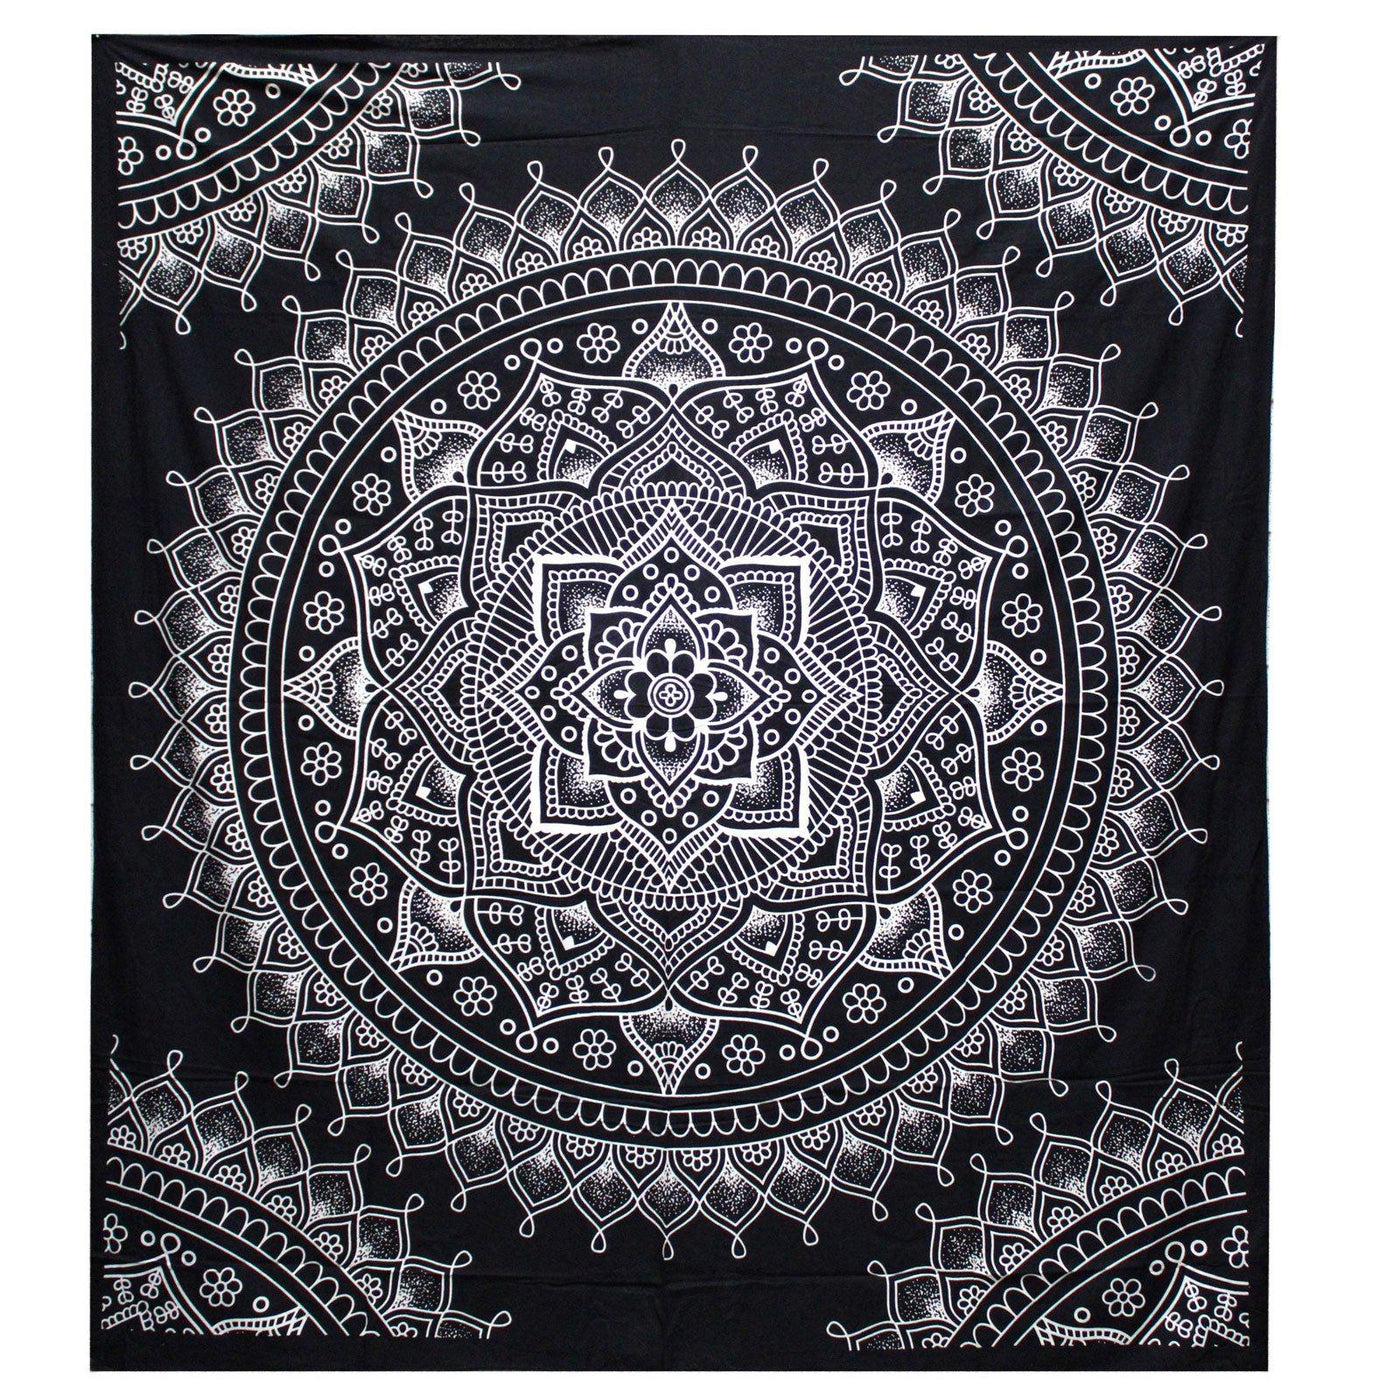 Black & White Double Cotton Bedspread Wall Hanging - Lotus Flower 